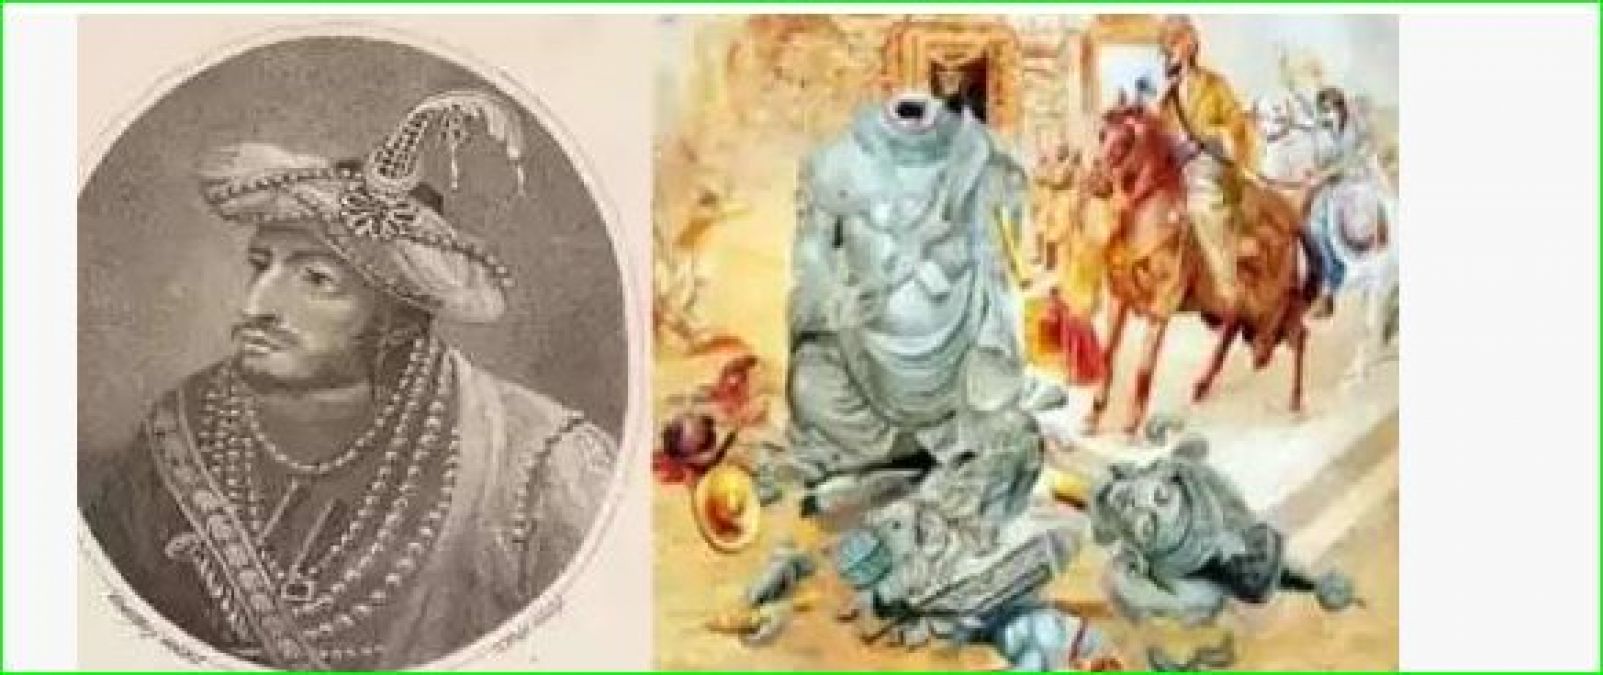 These great Indian kings were murdered by deception